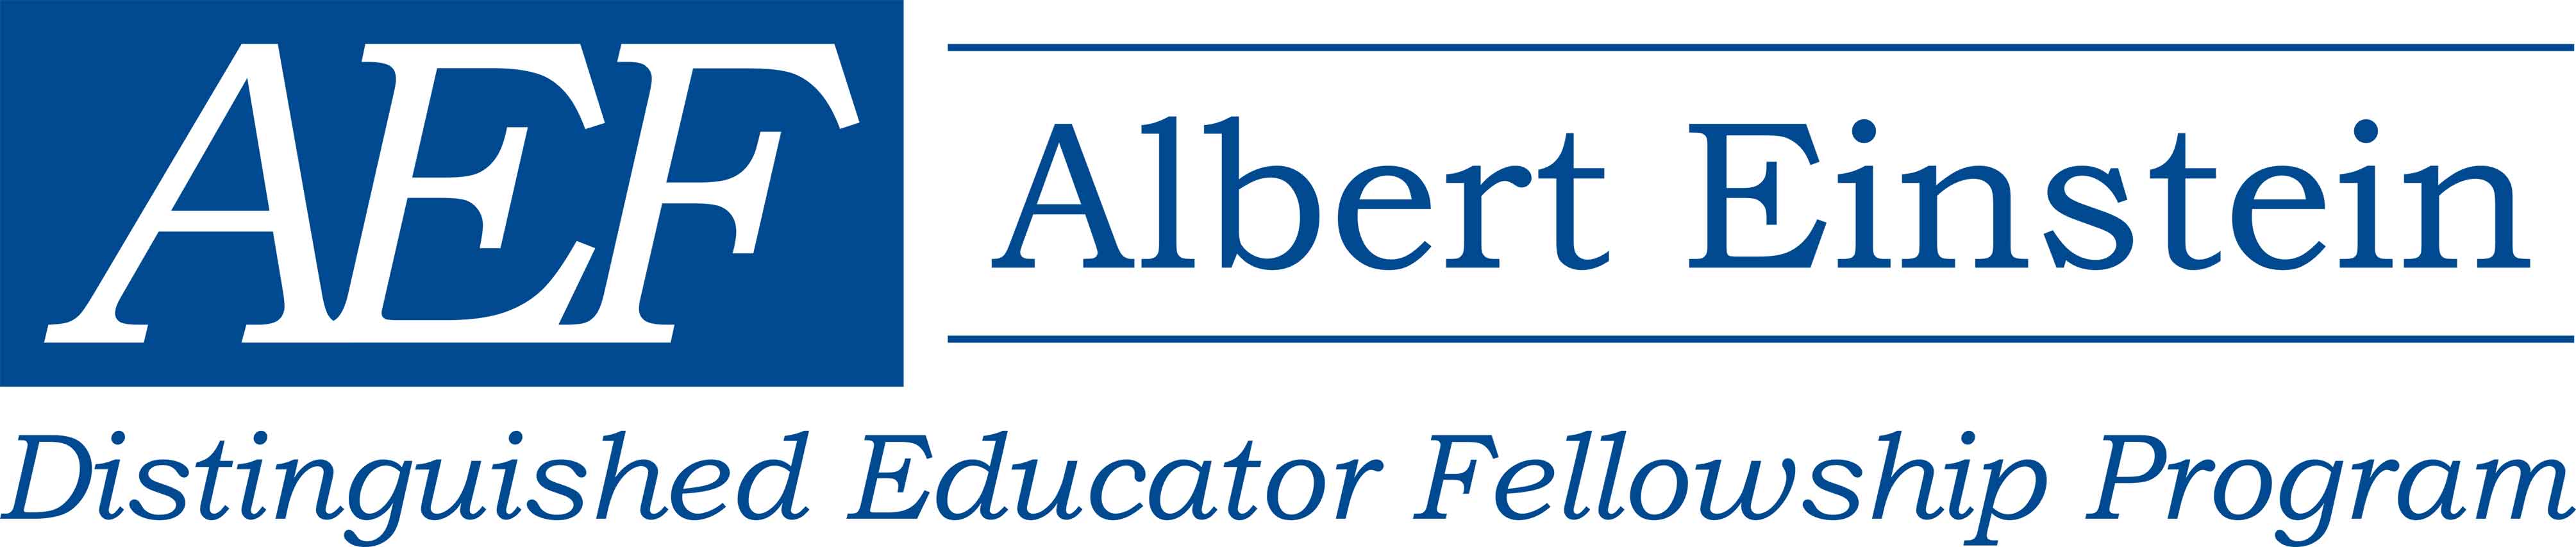 A selection of the nation’s most accomplished STEM teachers designated as Albert Einstein Educator Fellows